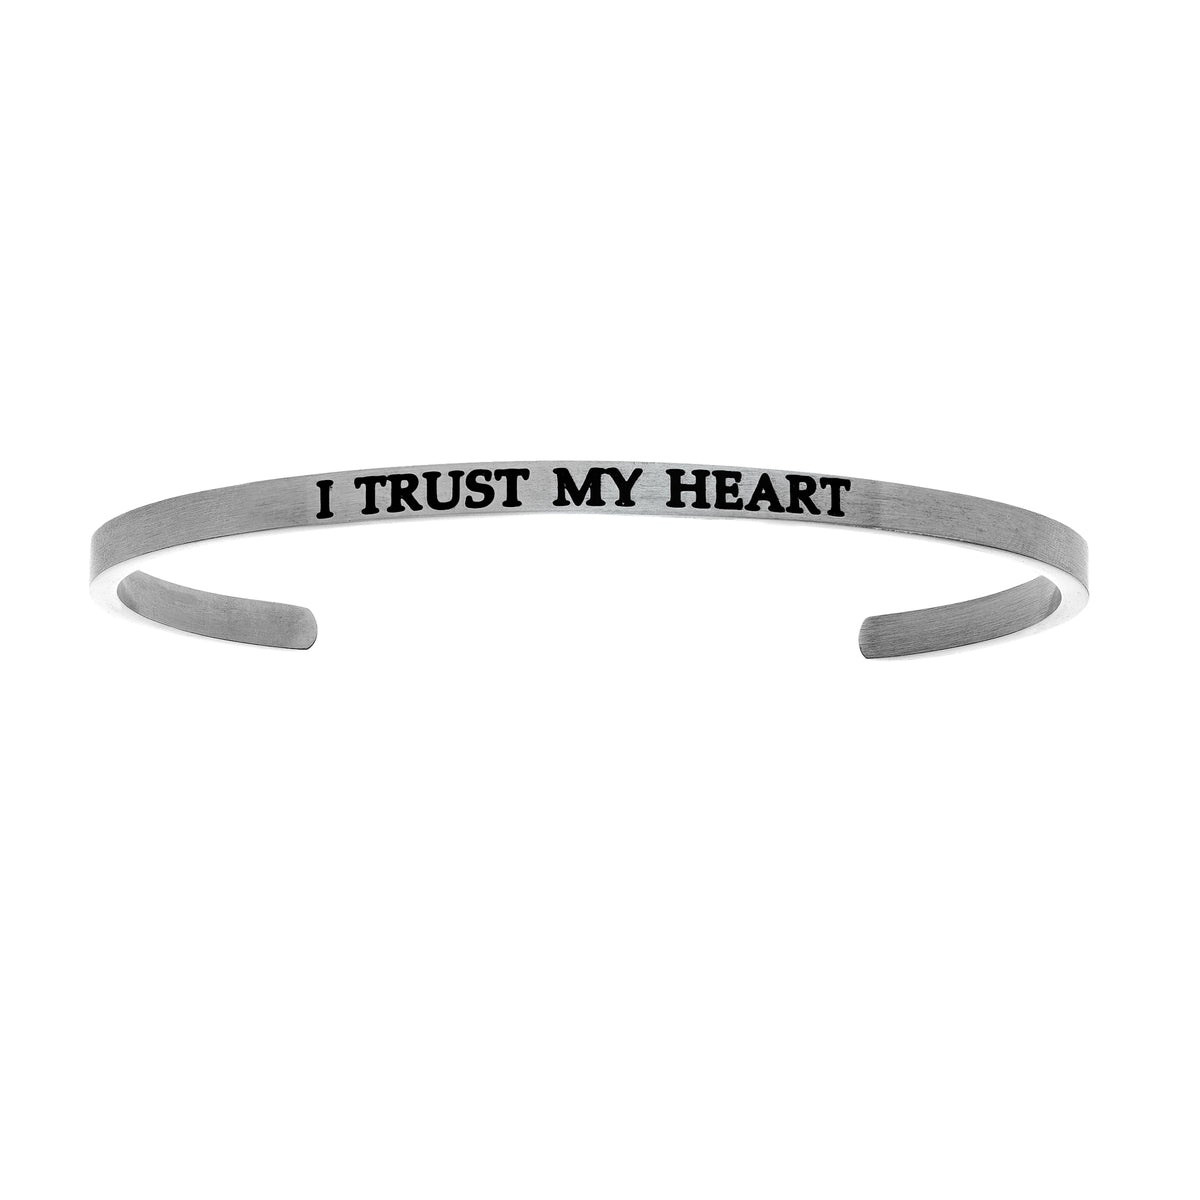 Intuitions Stainless Steel I TRUST MY HEART Diamond Accent Cuff Bangle Bracelet fine designer jewelry for men and women